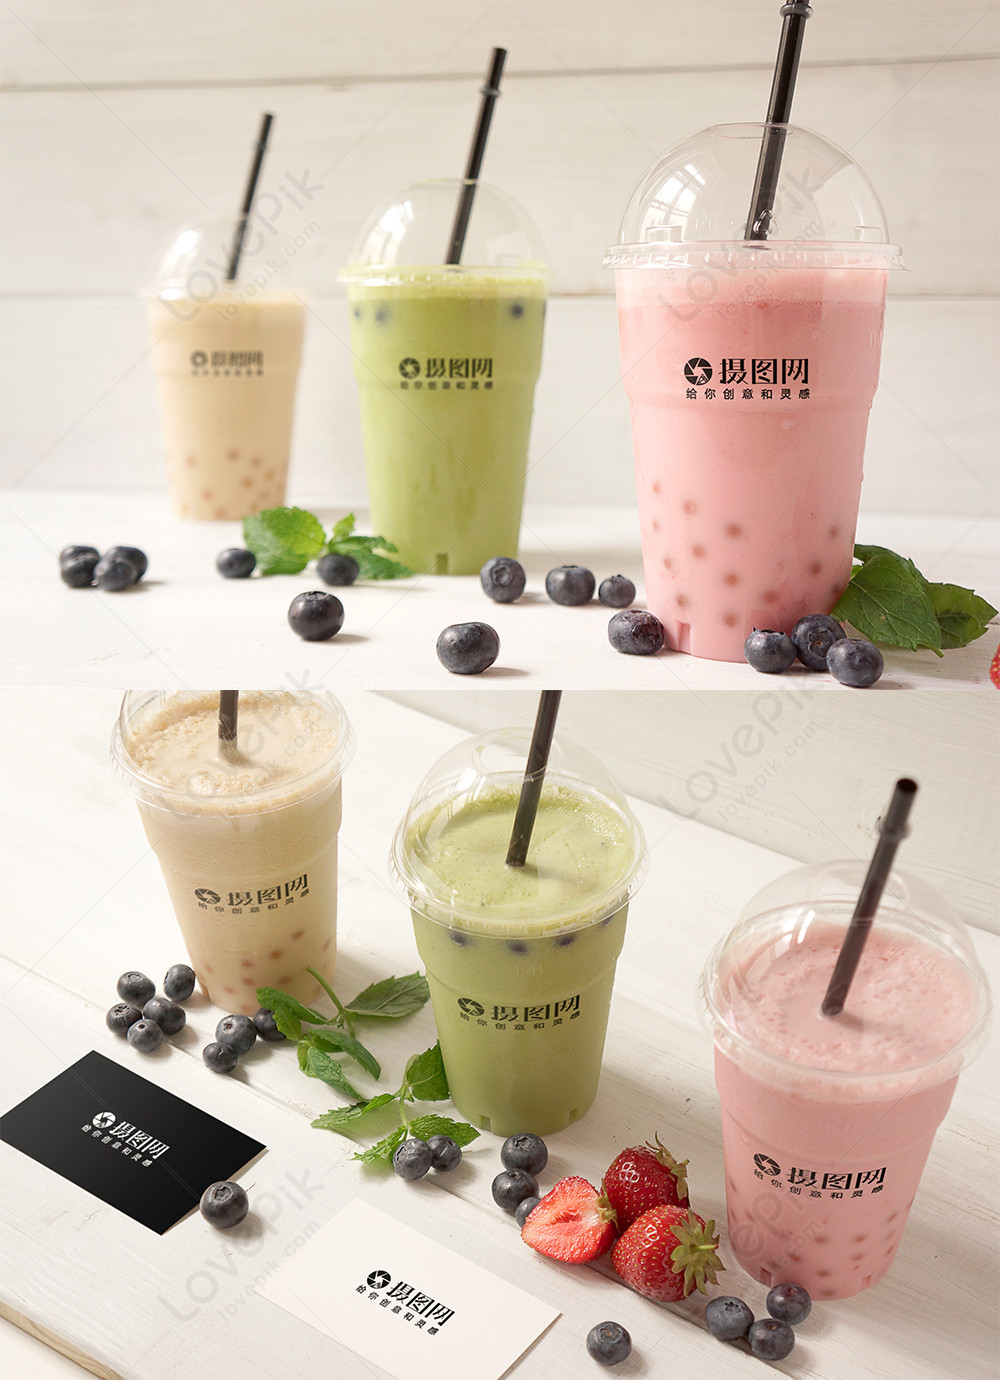 Download Bubble Tea Packaging Mockup Template Image Picture Free Download 400783908 Lovepik Com